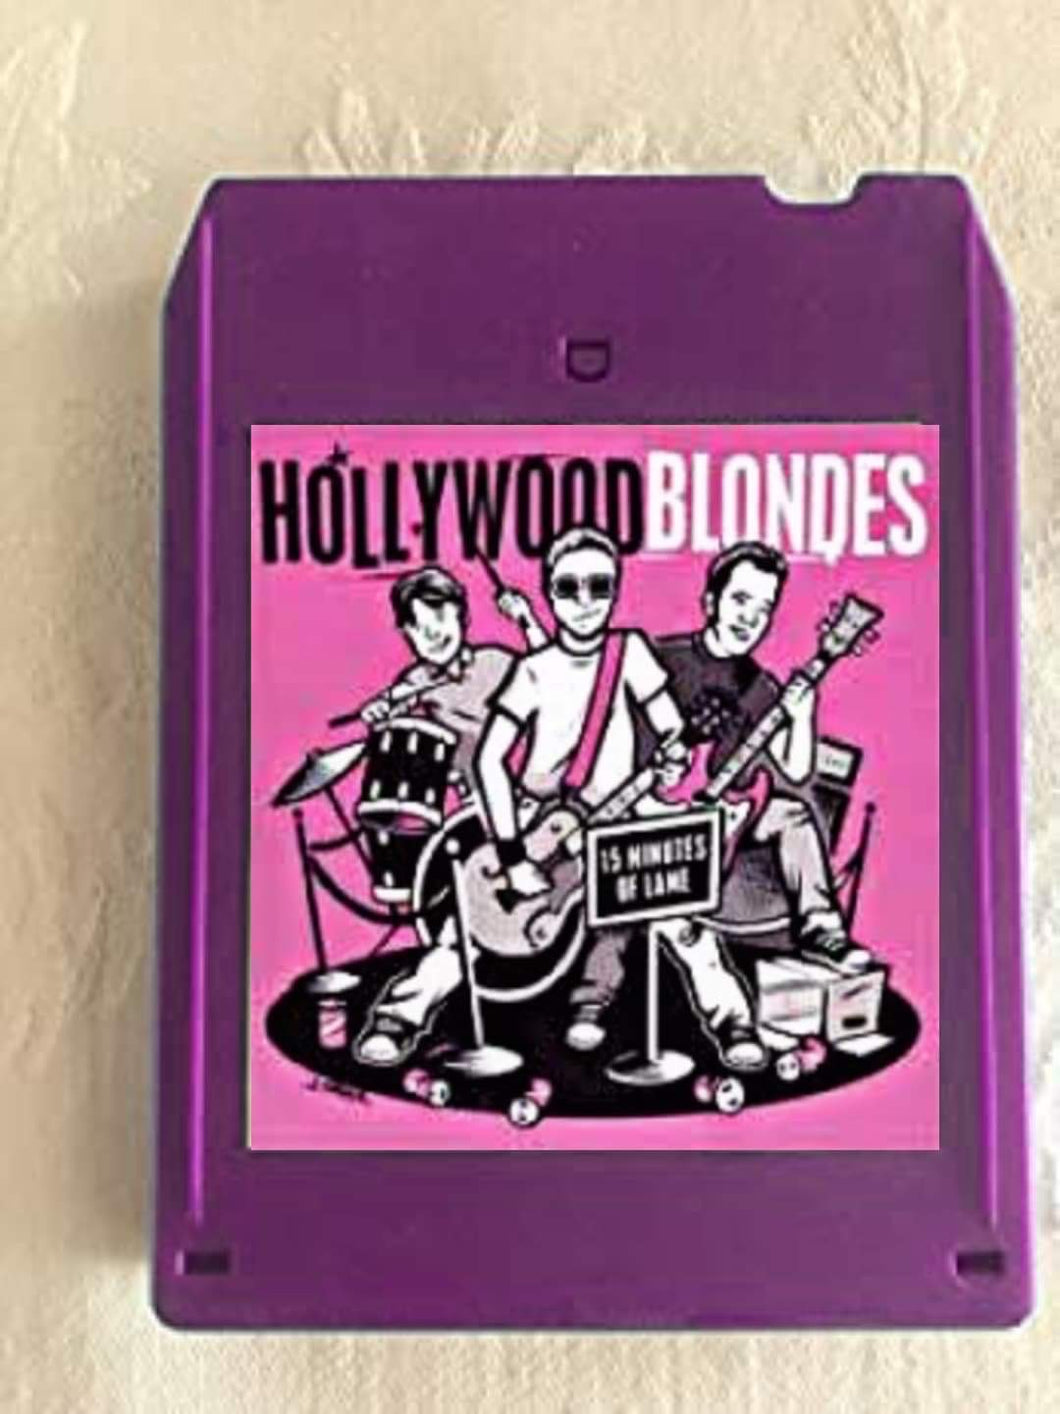 Hollywood Blondes 8track